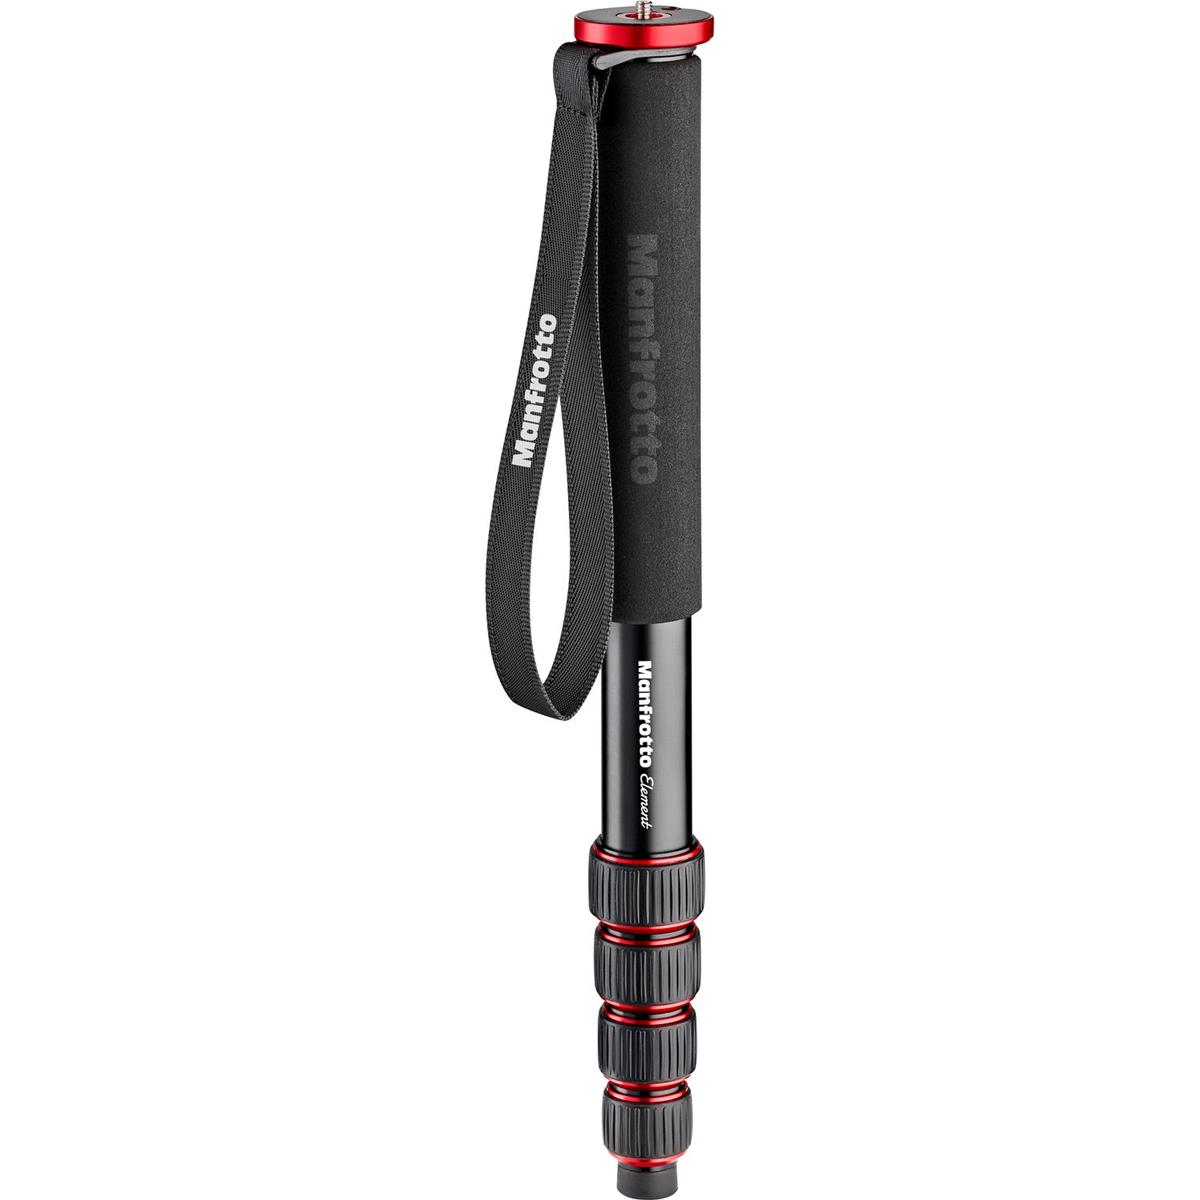 Manfrotto Element Aluminum Monopod (Red)